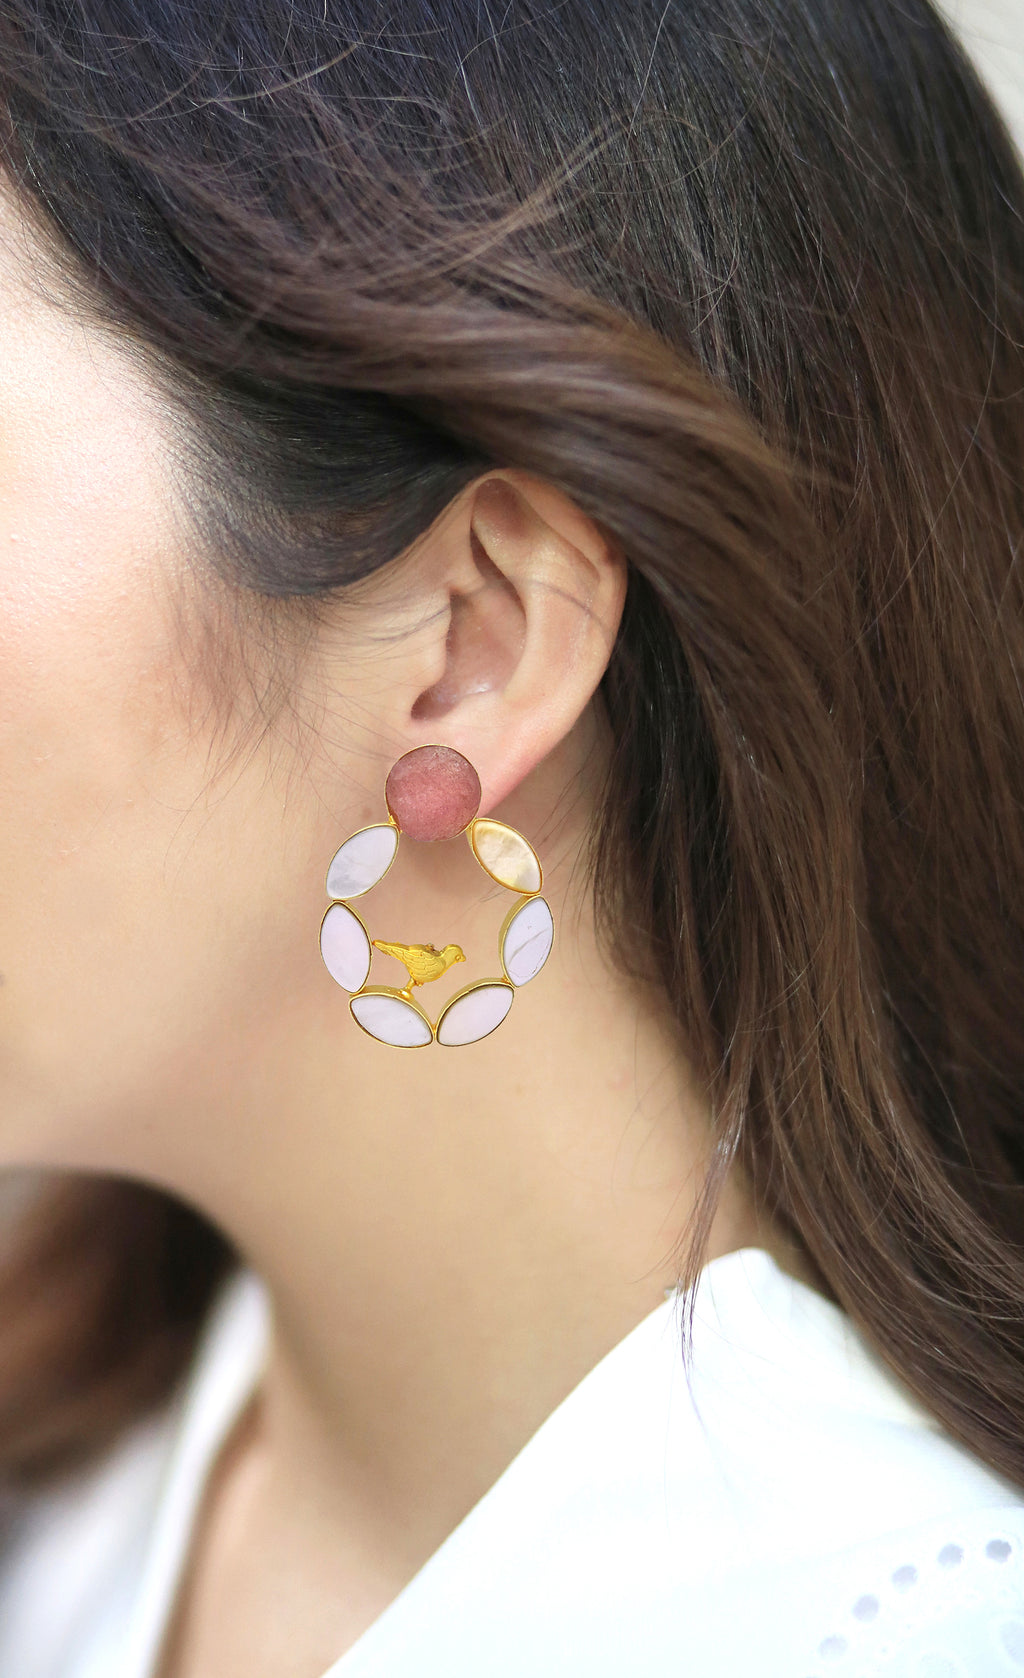 Pearl Cage Earrings (Quartz) - Statement Earrings - Gold-Plated & Hypoallergenic - Made in India - Dubai Jewellery - Dori